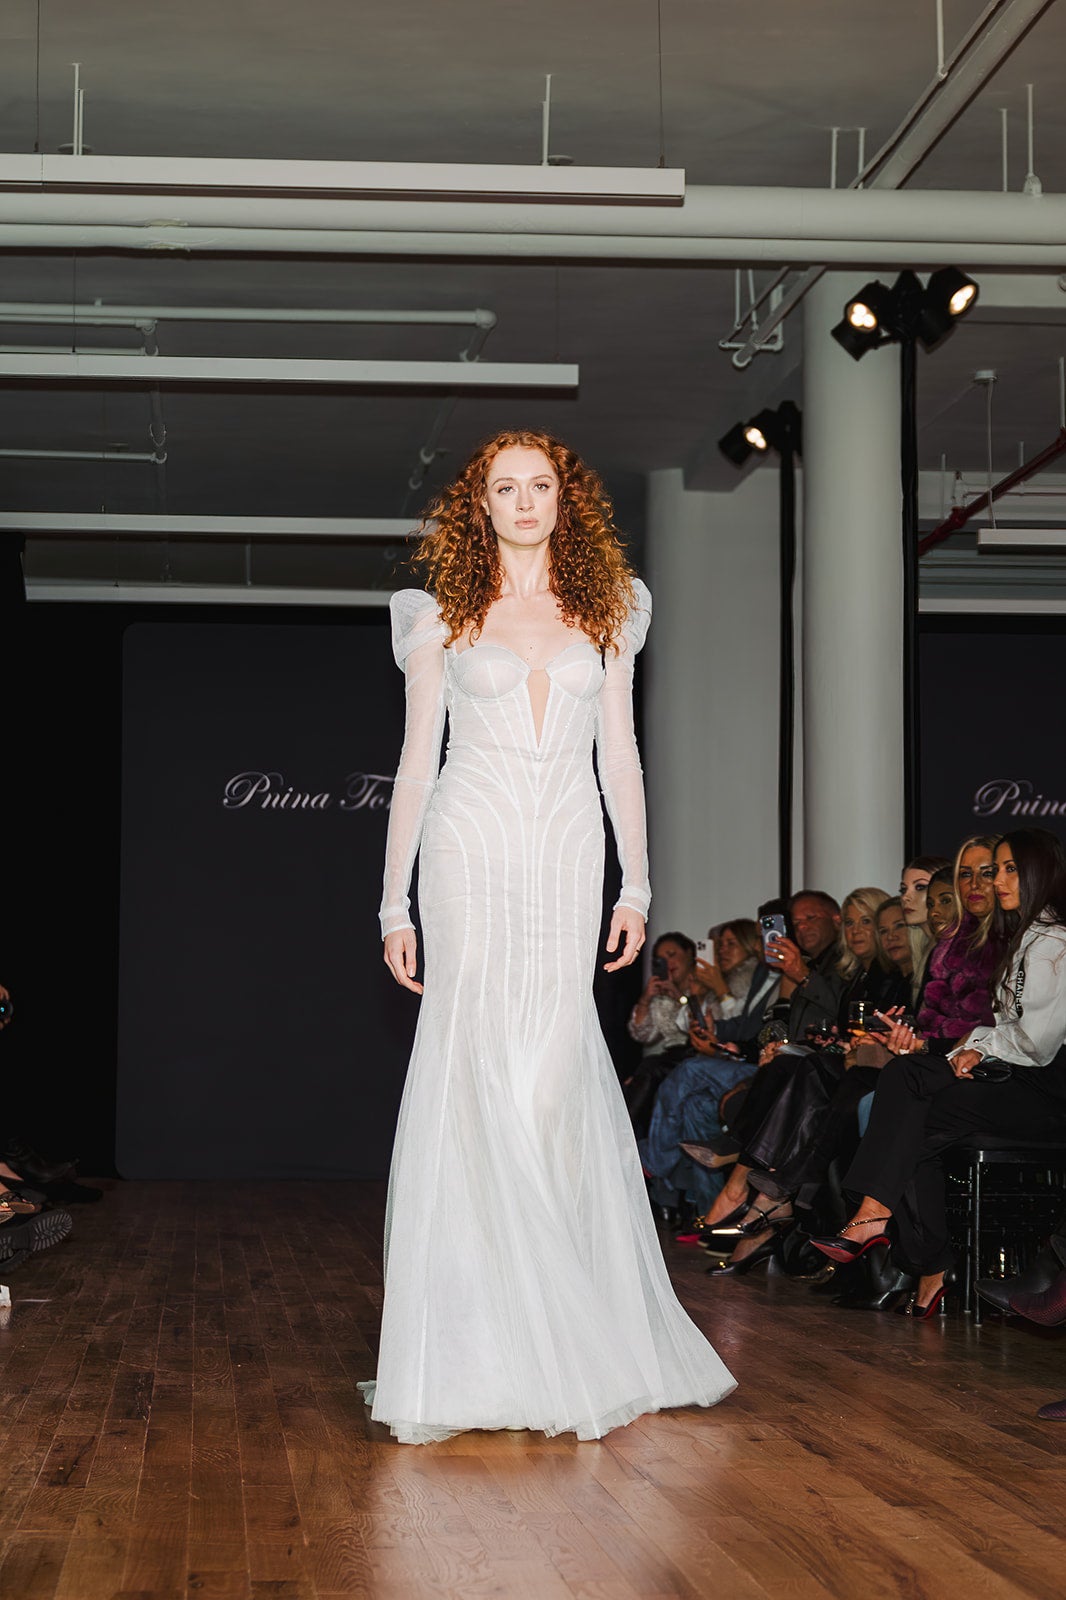 Long Sleeve Crystal Fit-and-Flare Gown by Pnina Tornai - Image 1